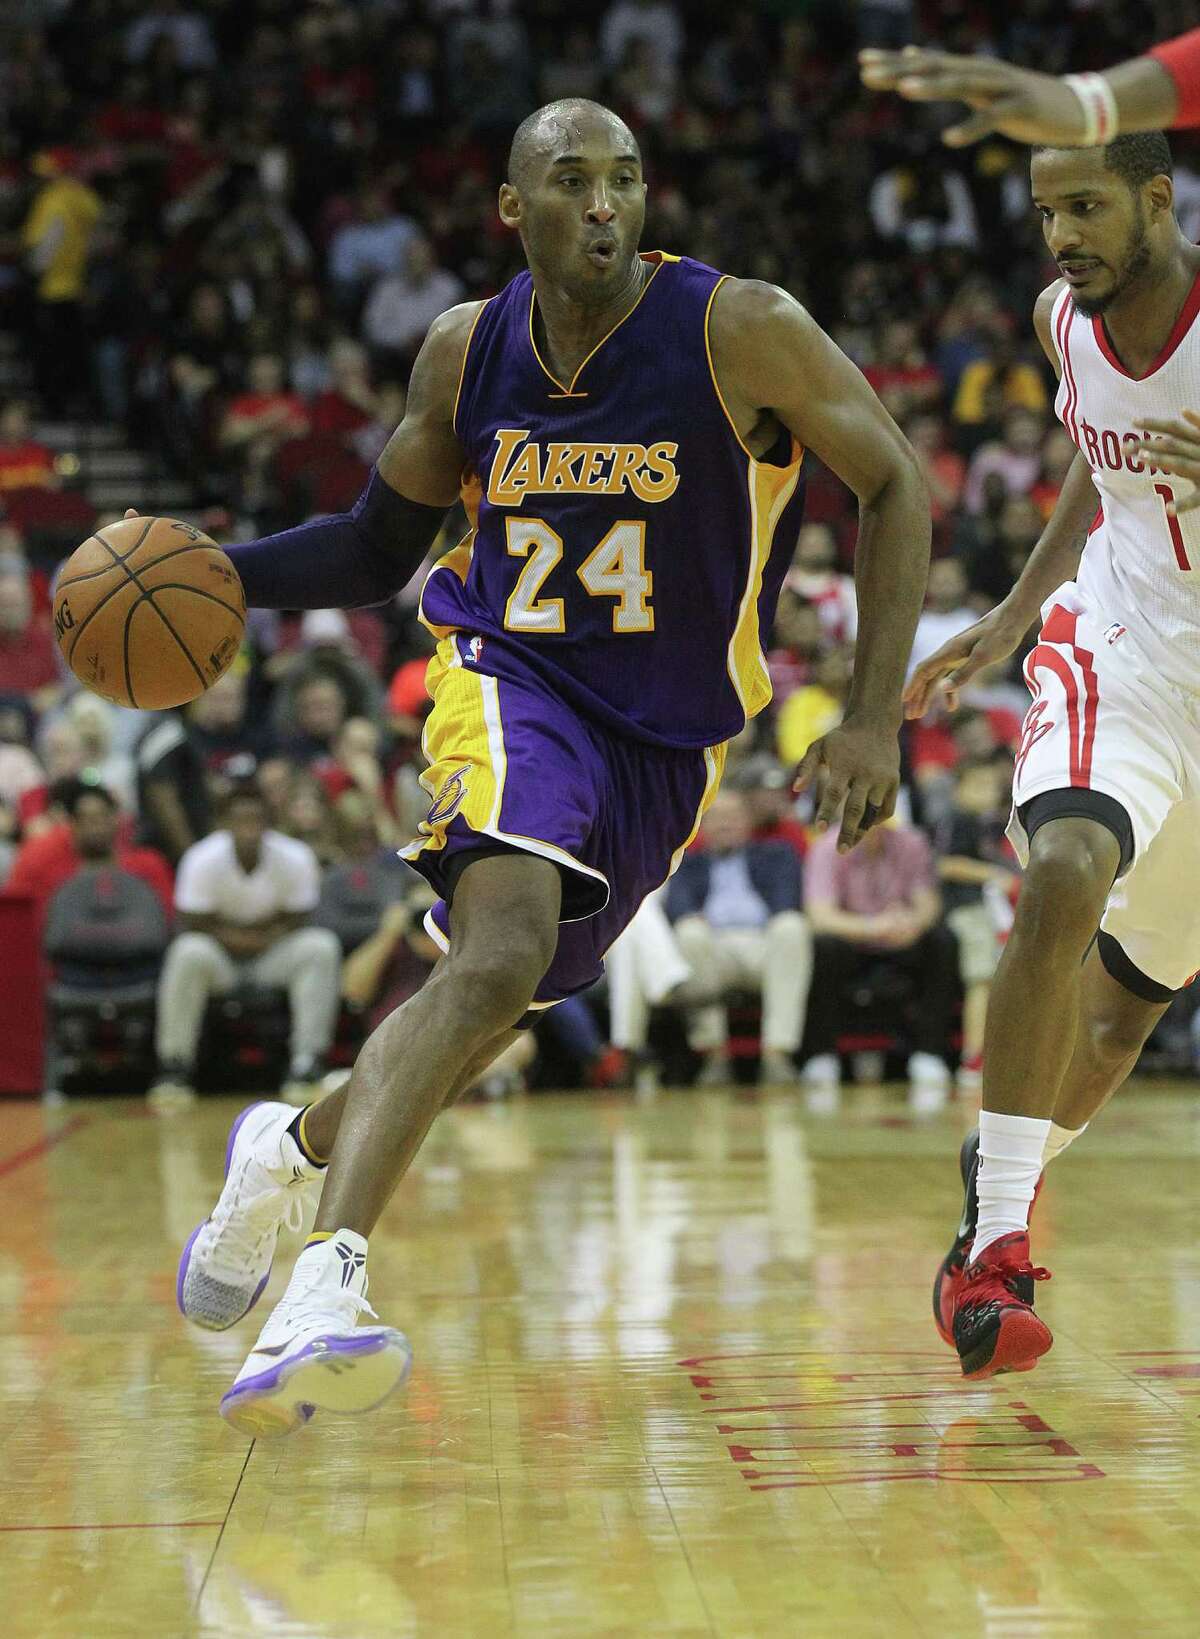 Kobe Bryant ﻿scored 25 points with seven rebounds and six assists in the Lakers' 126-97 loss to the Rockets.